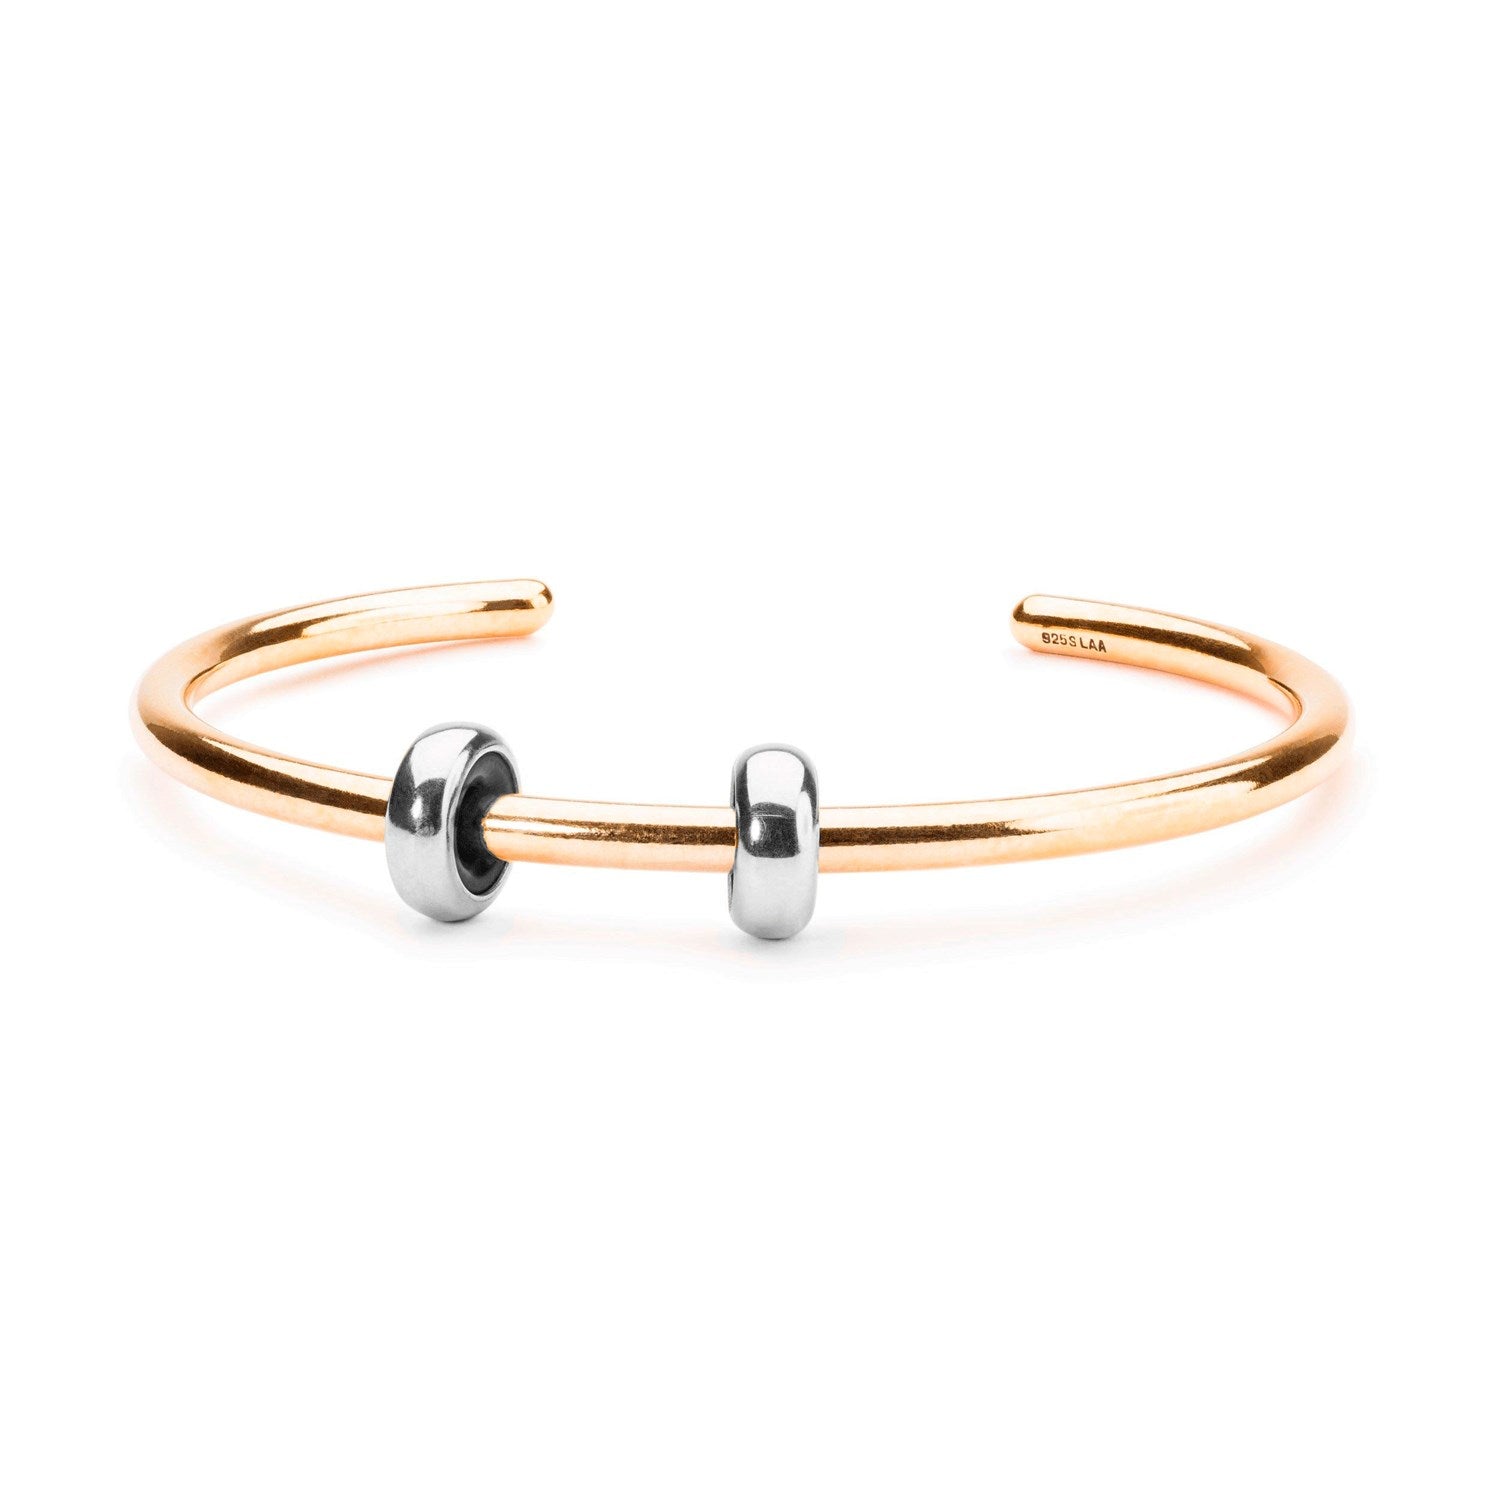 Gold Plated Bangle with 2 x Silver Spacers - Trollbeads USA